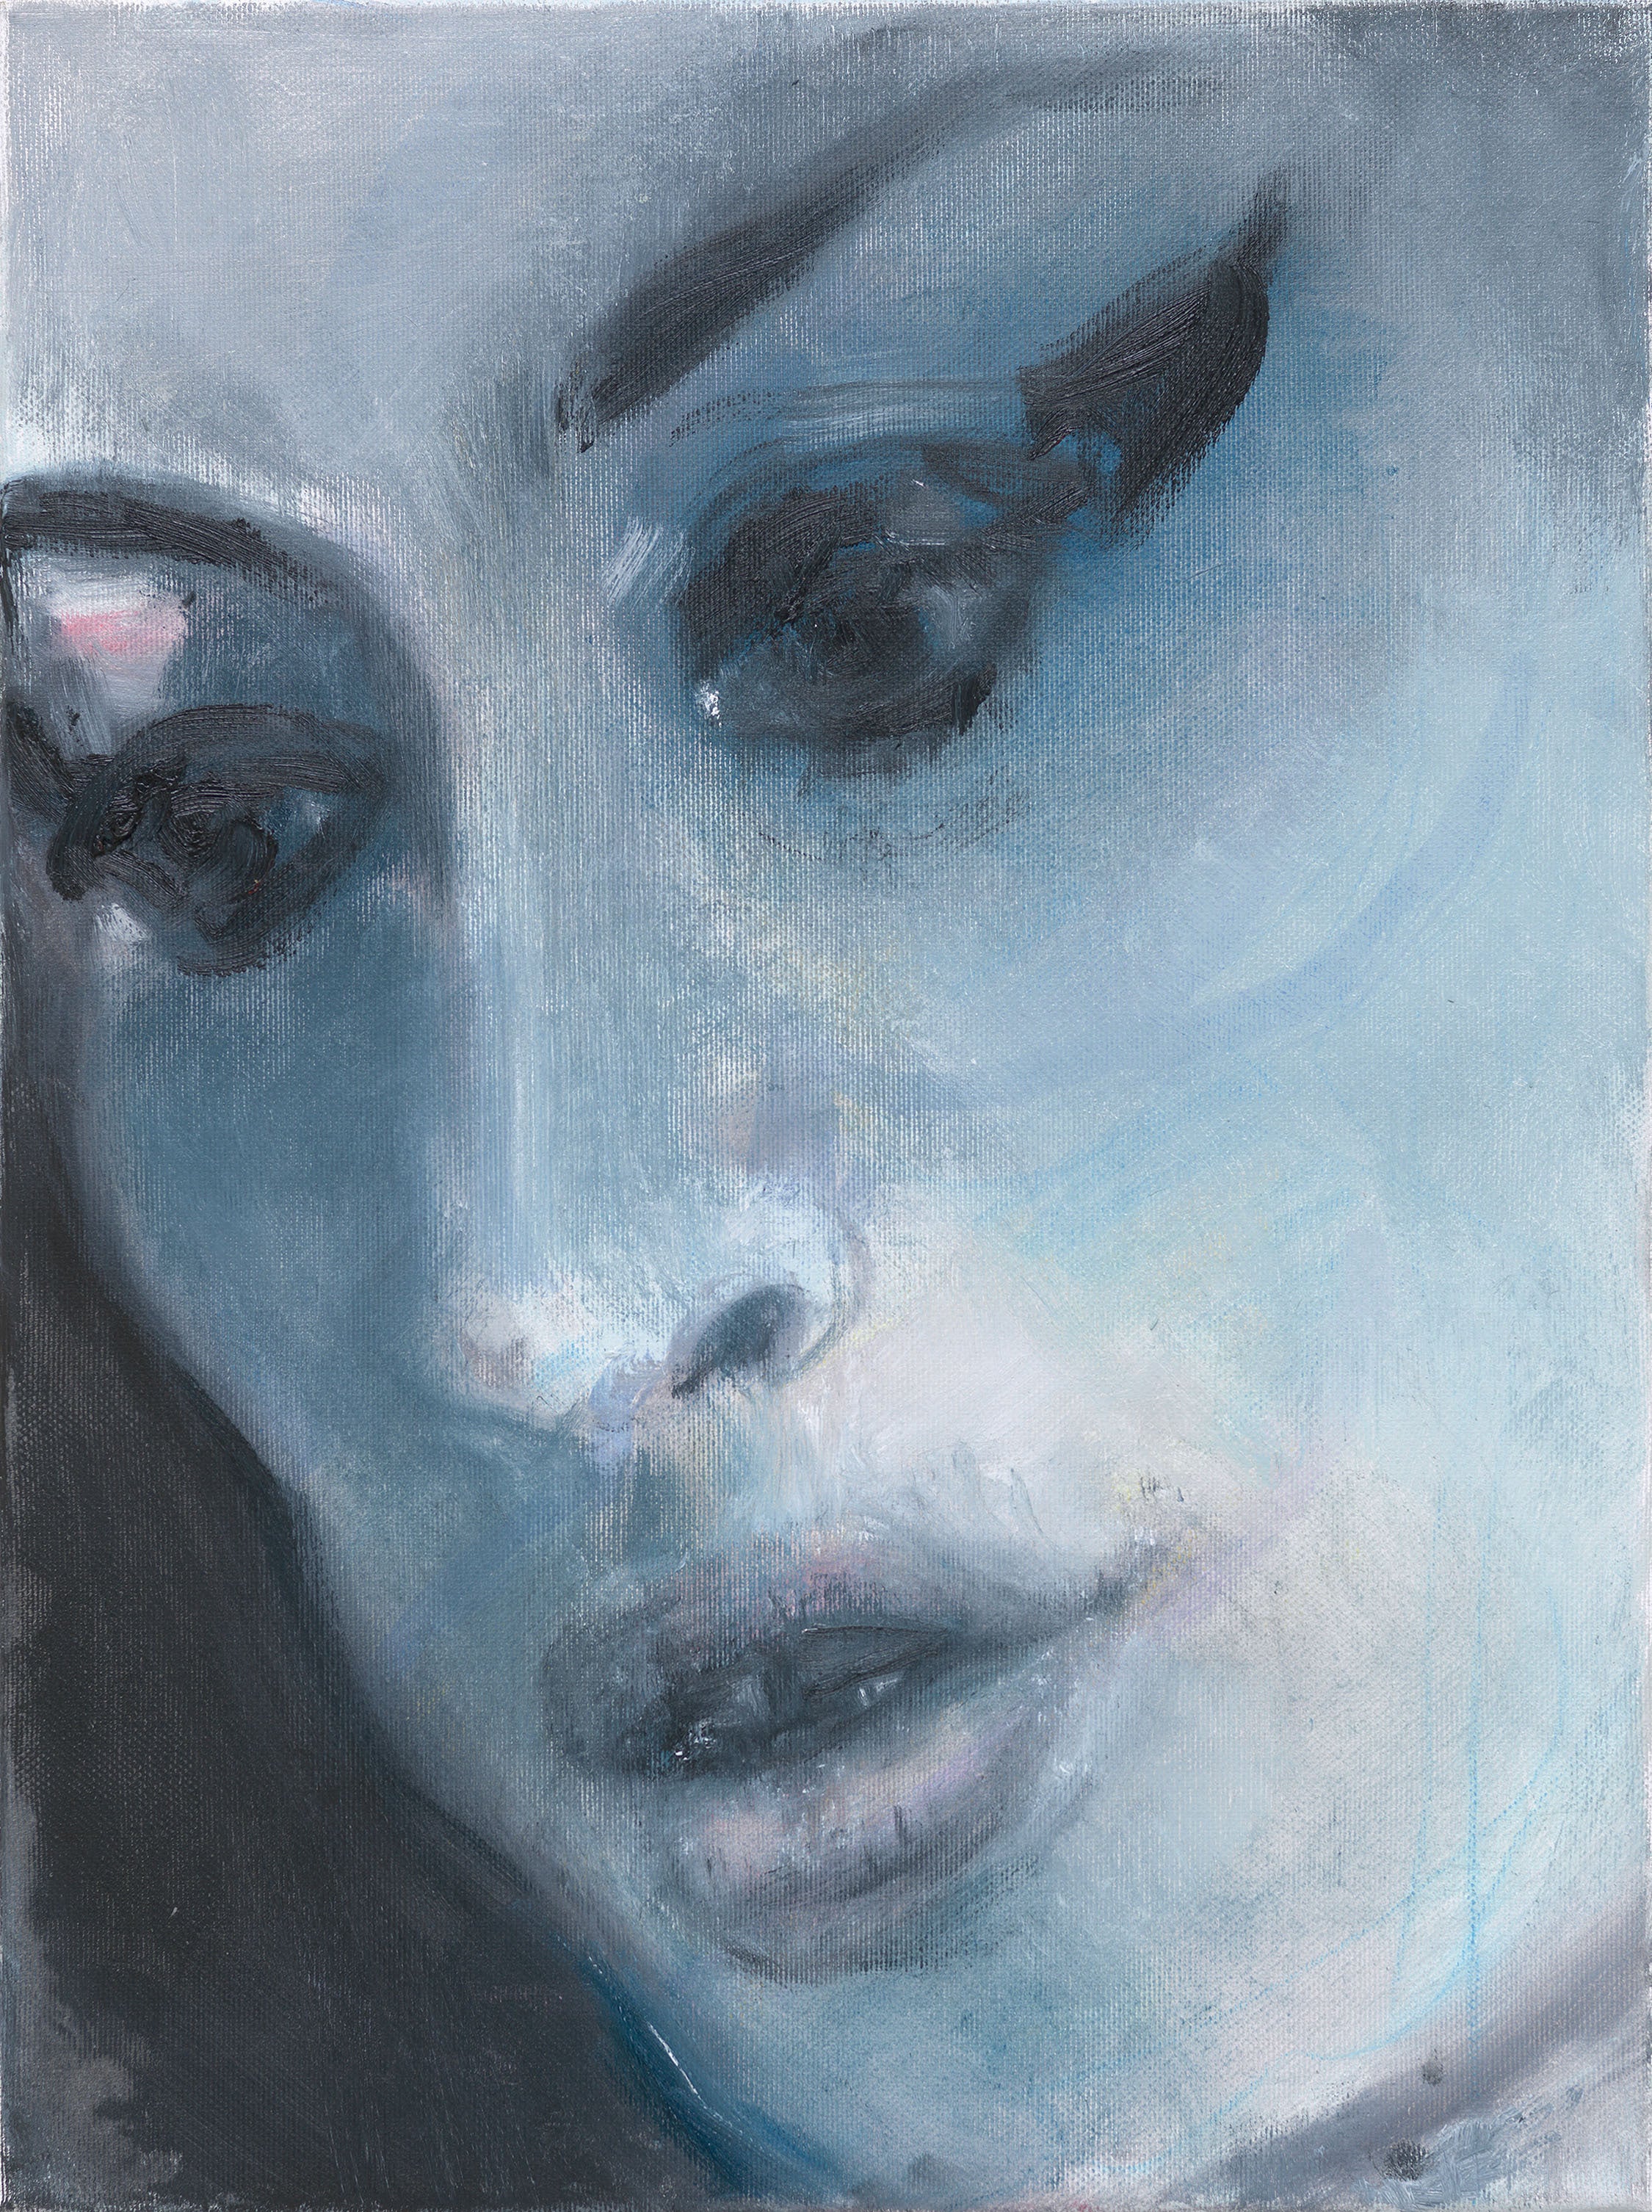 "Amy Blue" by Marlene Dumas. The painting of Amy Winehouse has joined images of Sir Winston Churchill and the Queen by going on display at the National Portrait Gallery